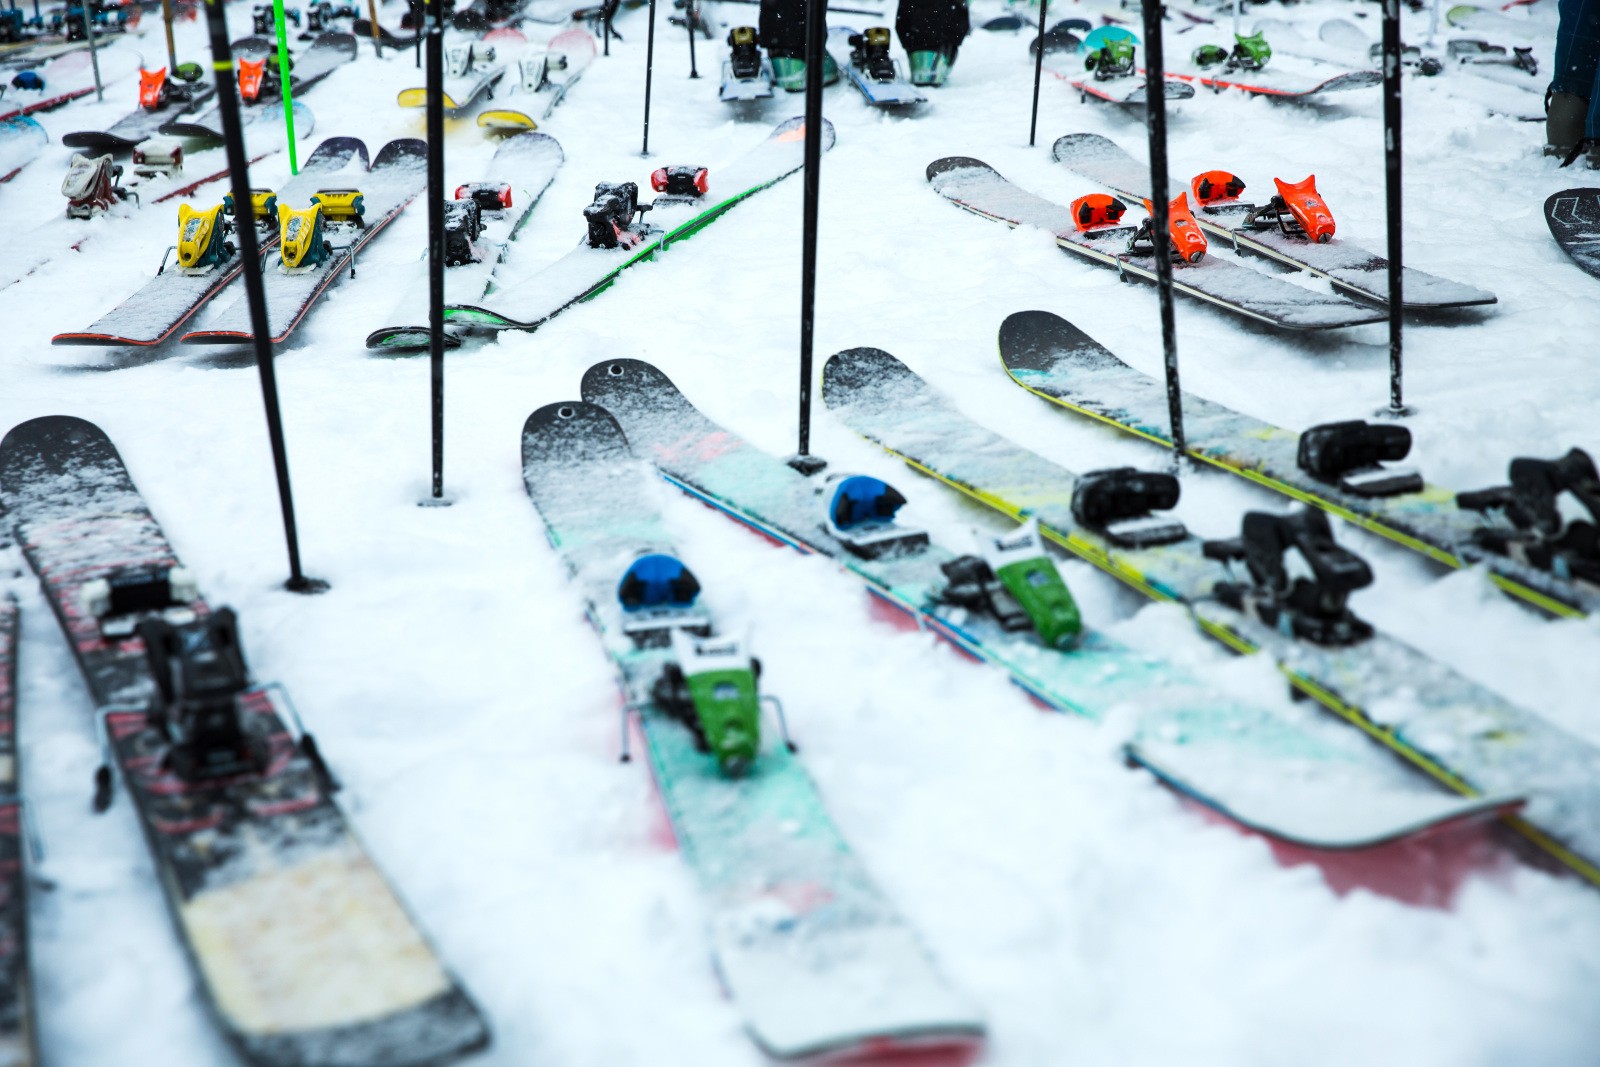 How to Store Your Ski and Snowboard Gear for Summer